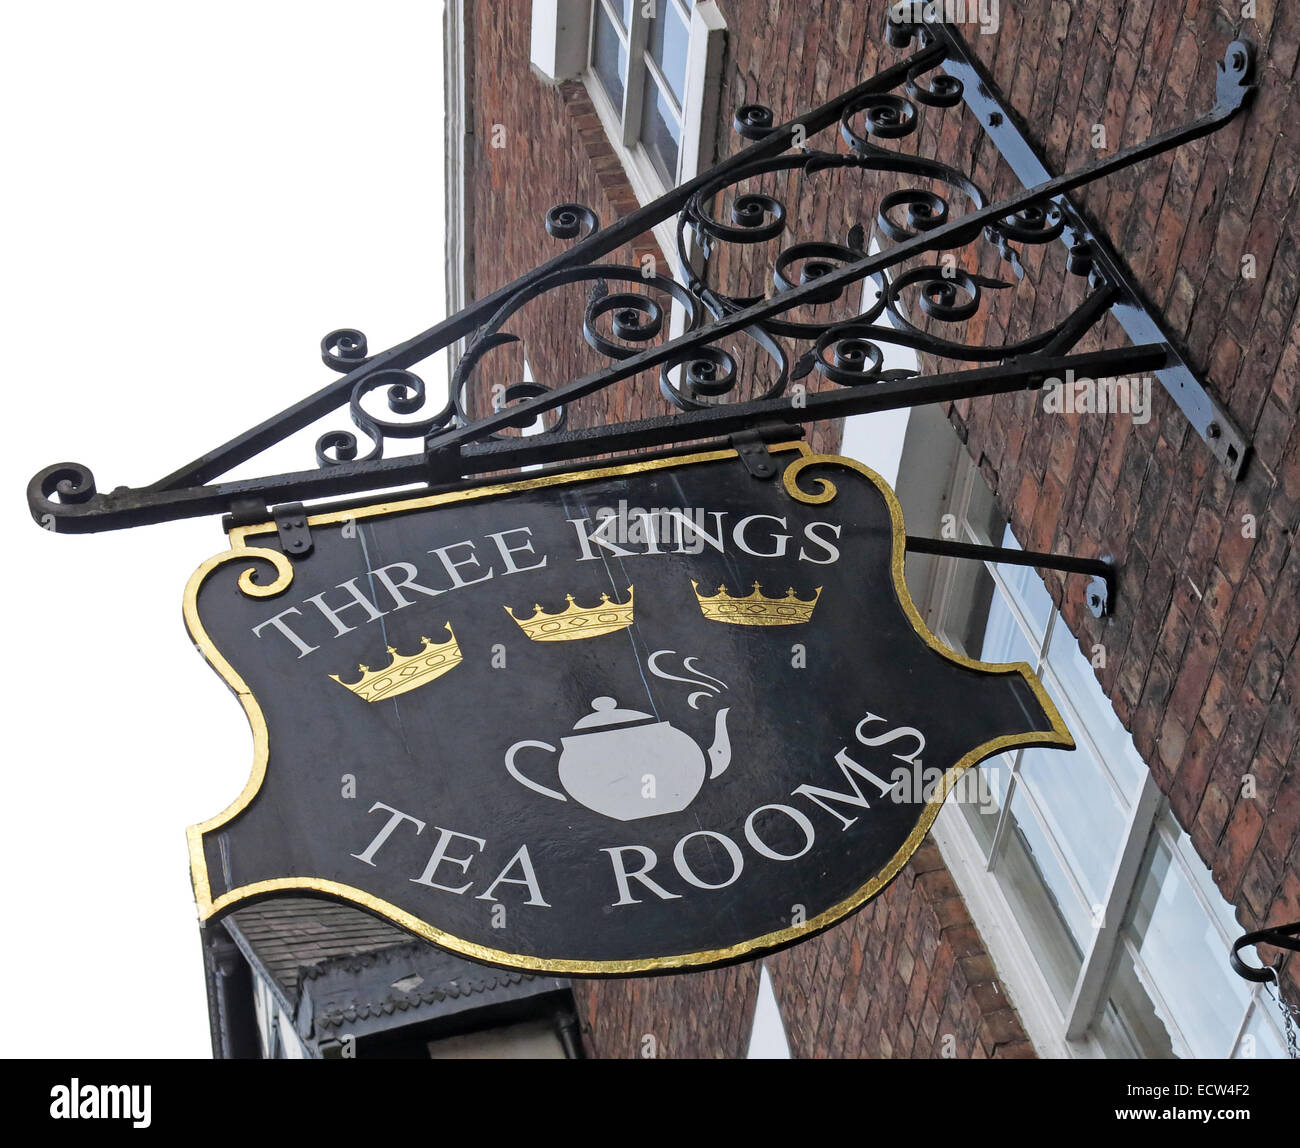 The Three Kings Tea Rooms, Chester City, Cheshire, Angleterre, Royaume-Uni Banque D'Images